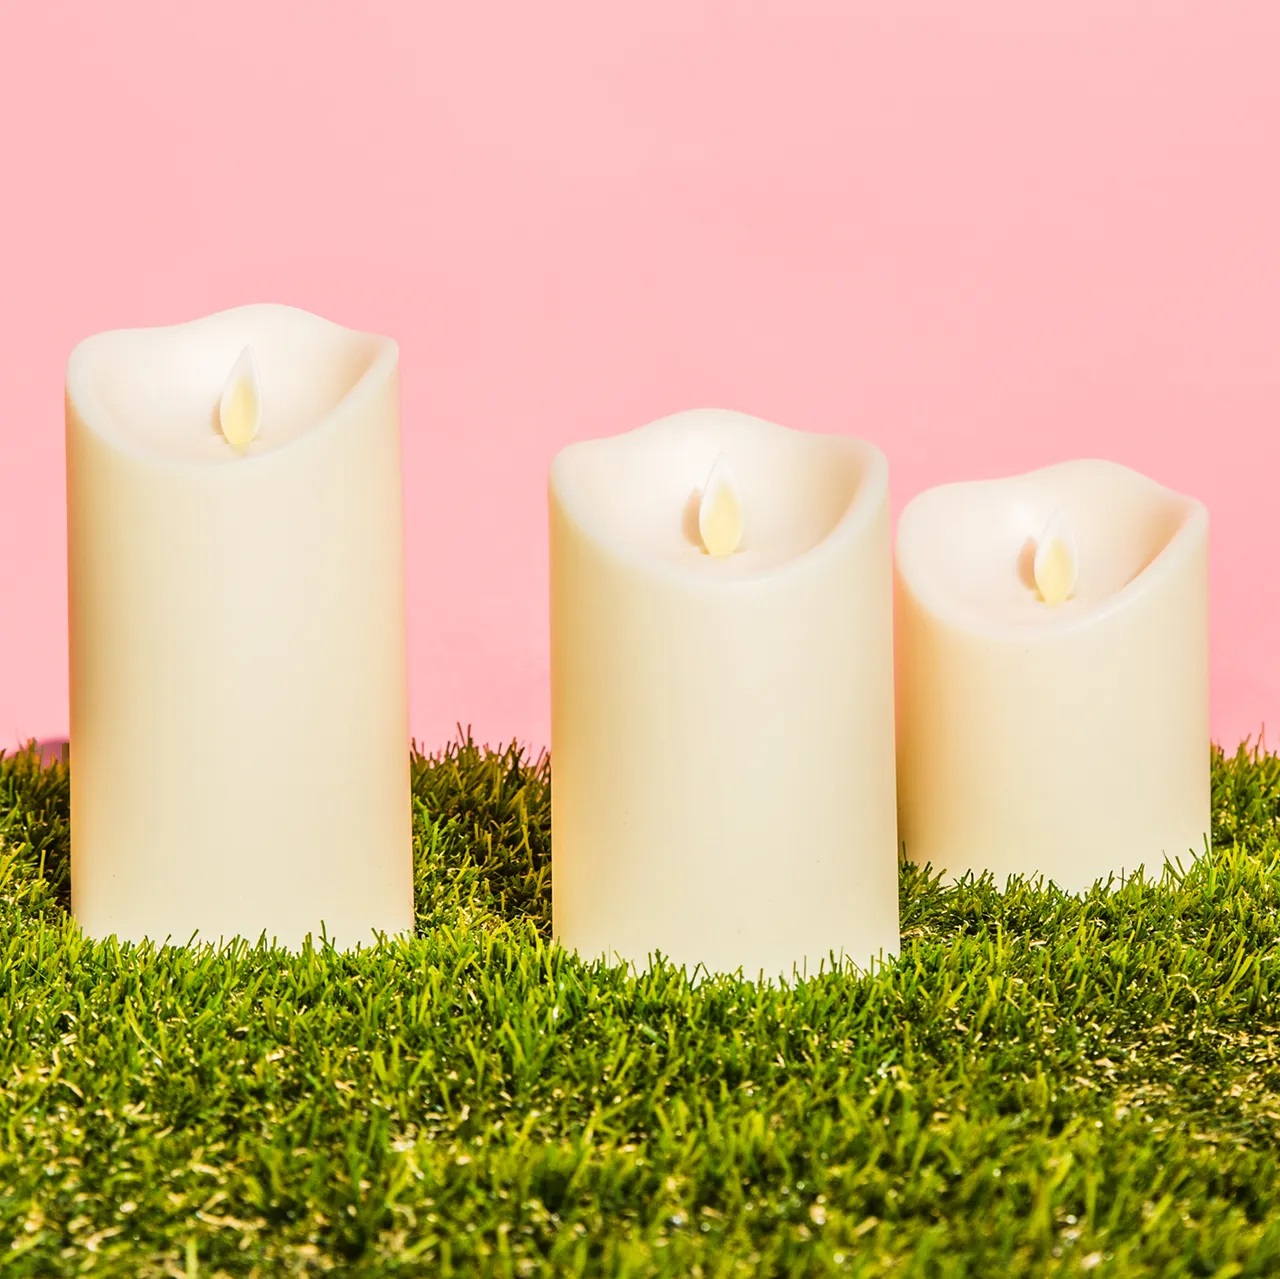 How to Fix a Flameless Candle